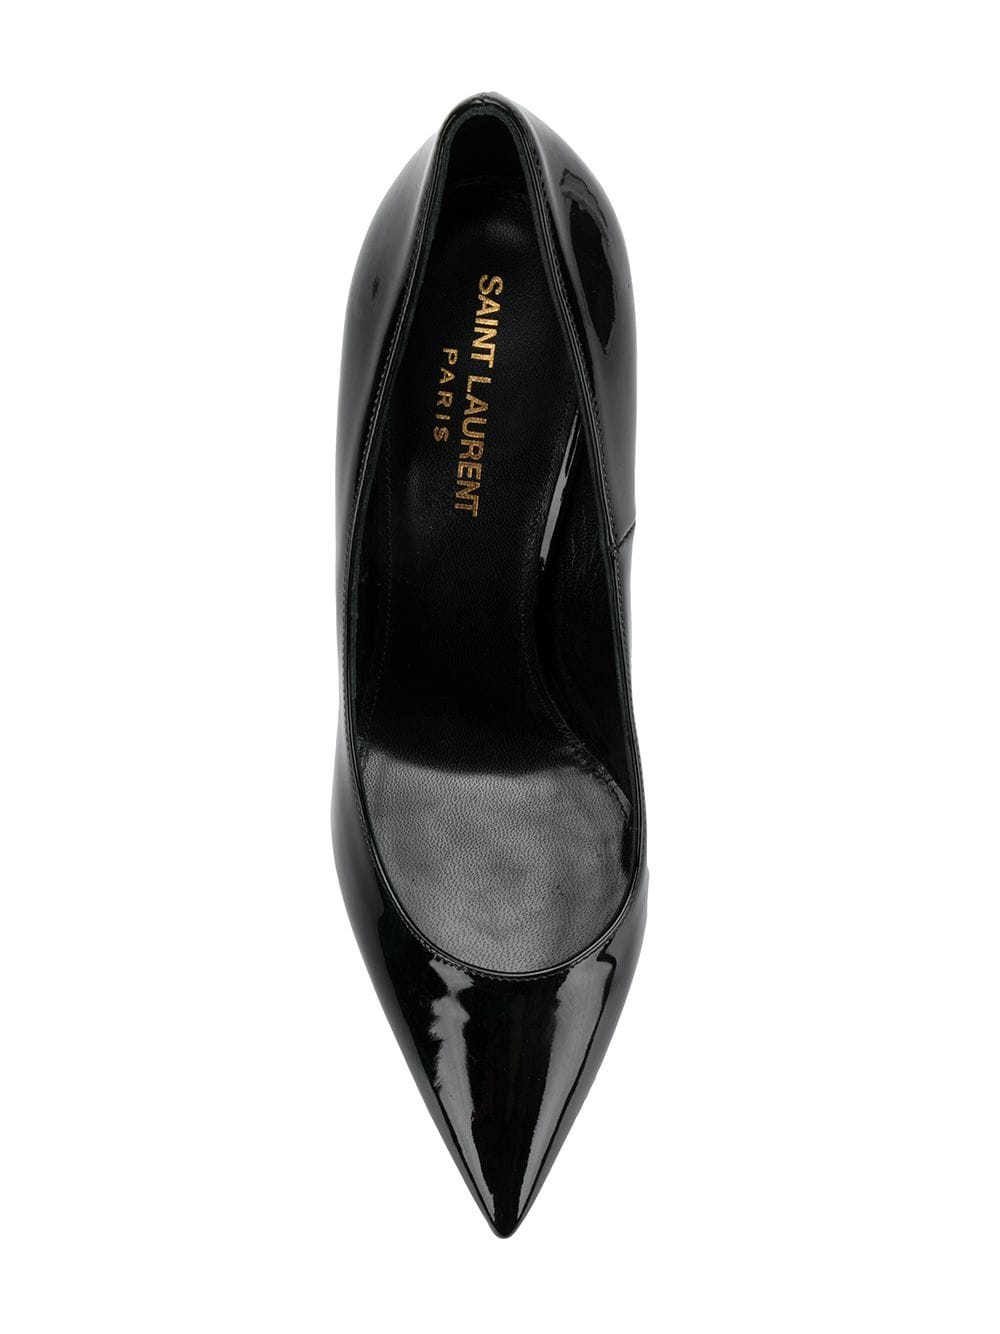 SAINT LAURENT Black and Gold Patent Leather Opyum Pumps for Women